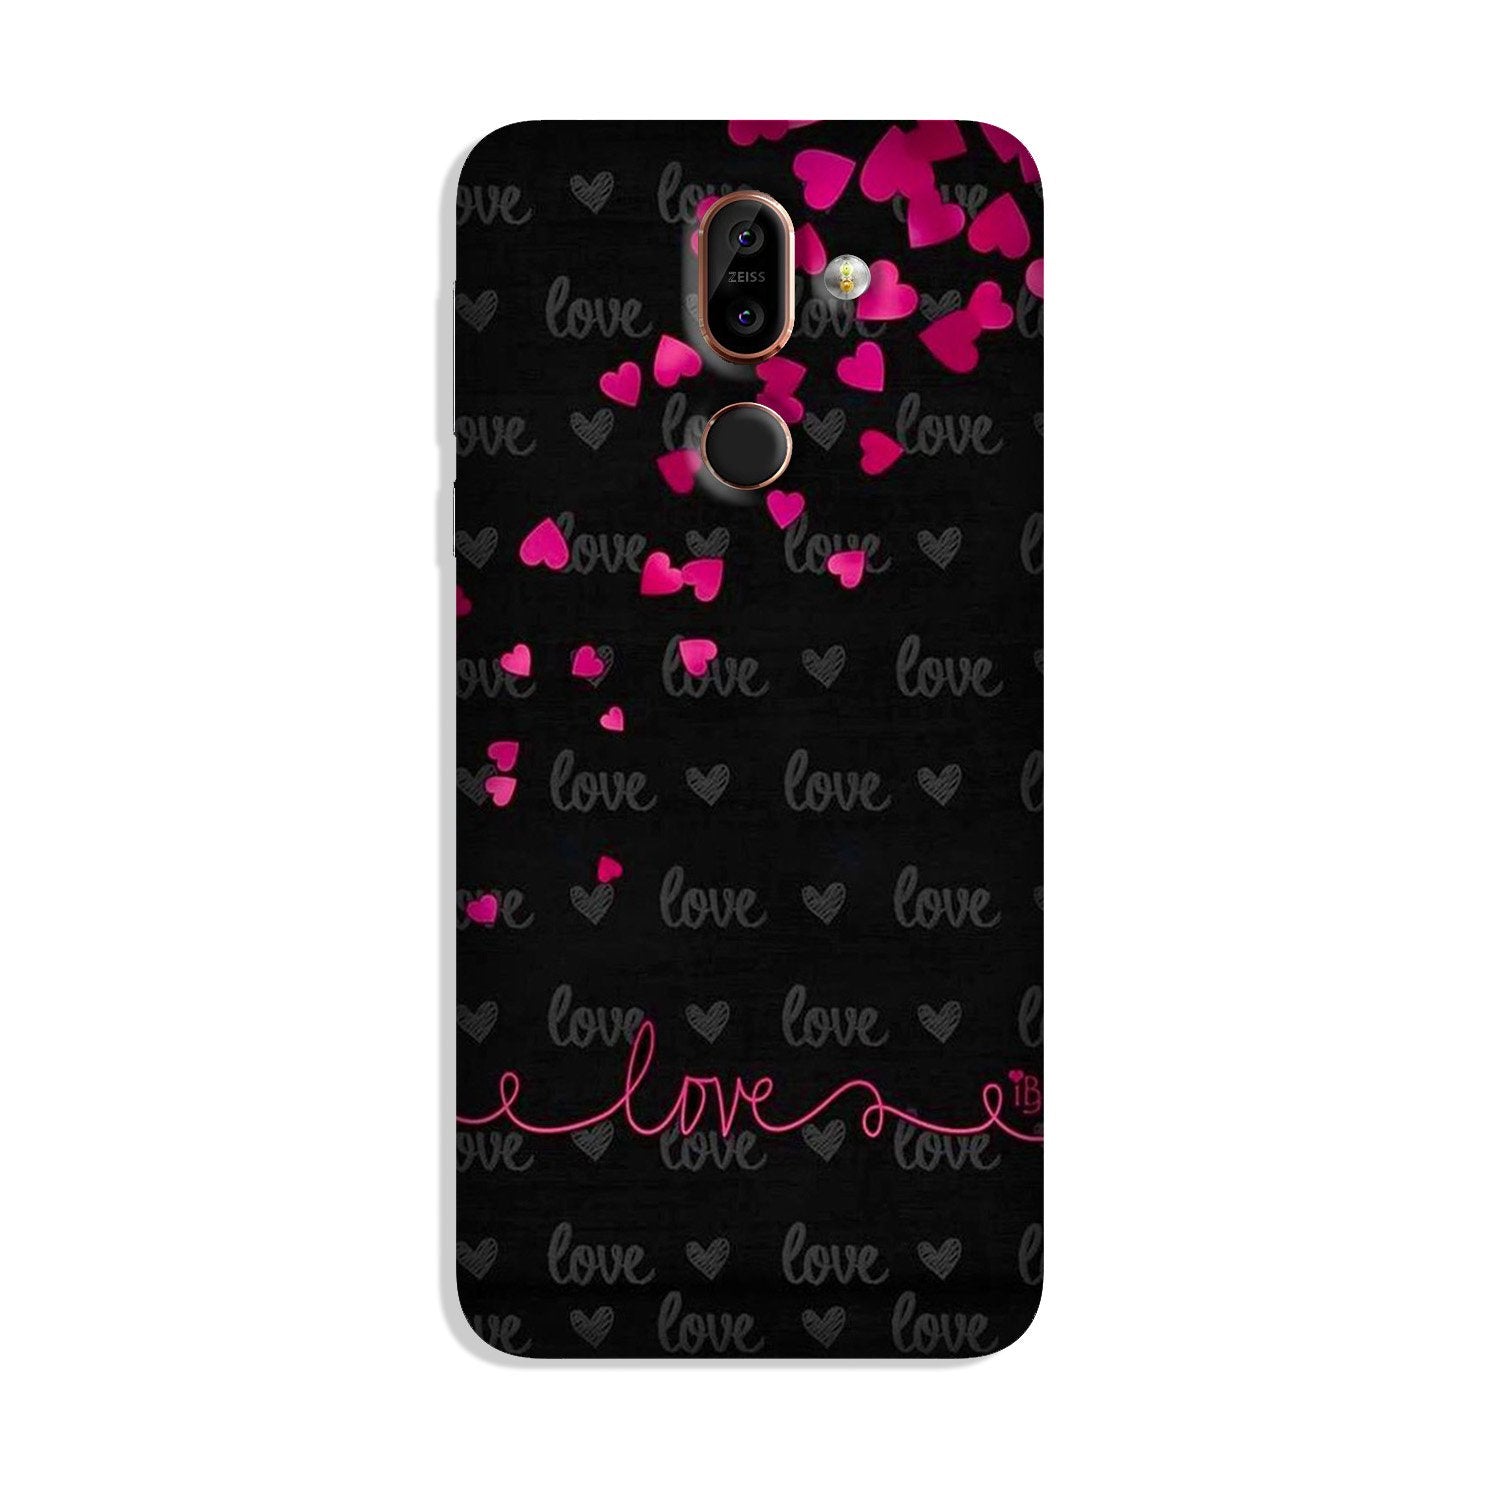 Love in Air Case for Nokia 8.1